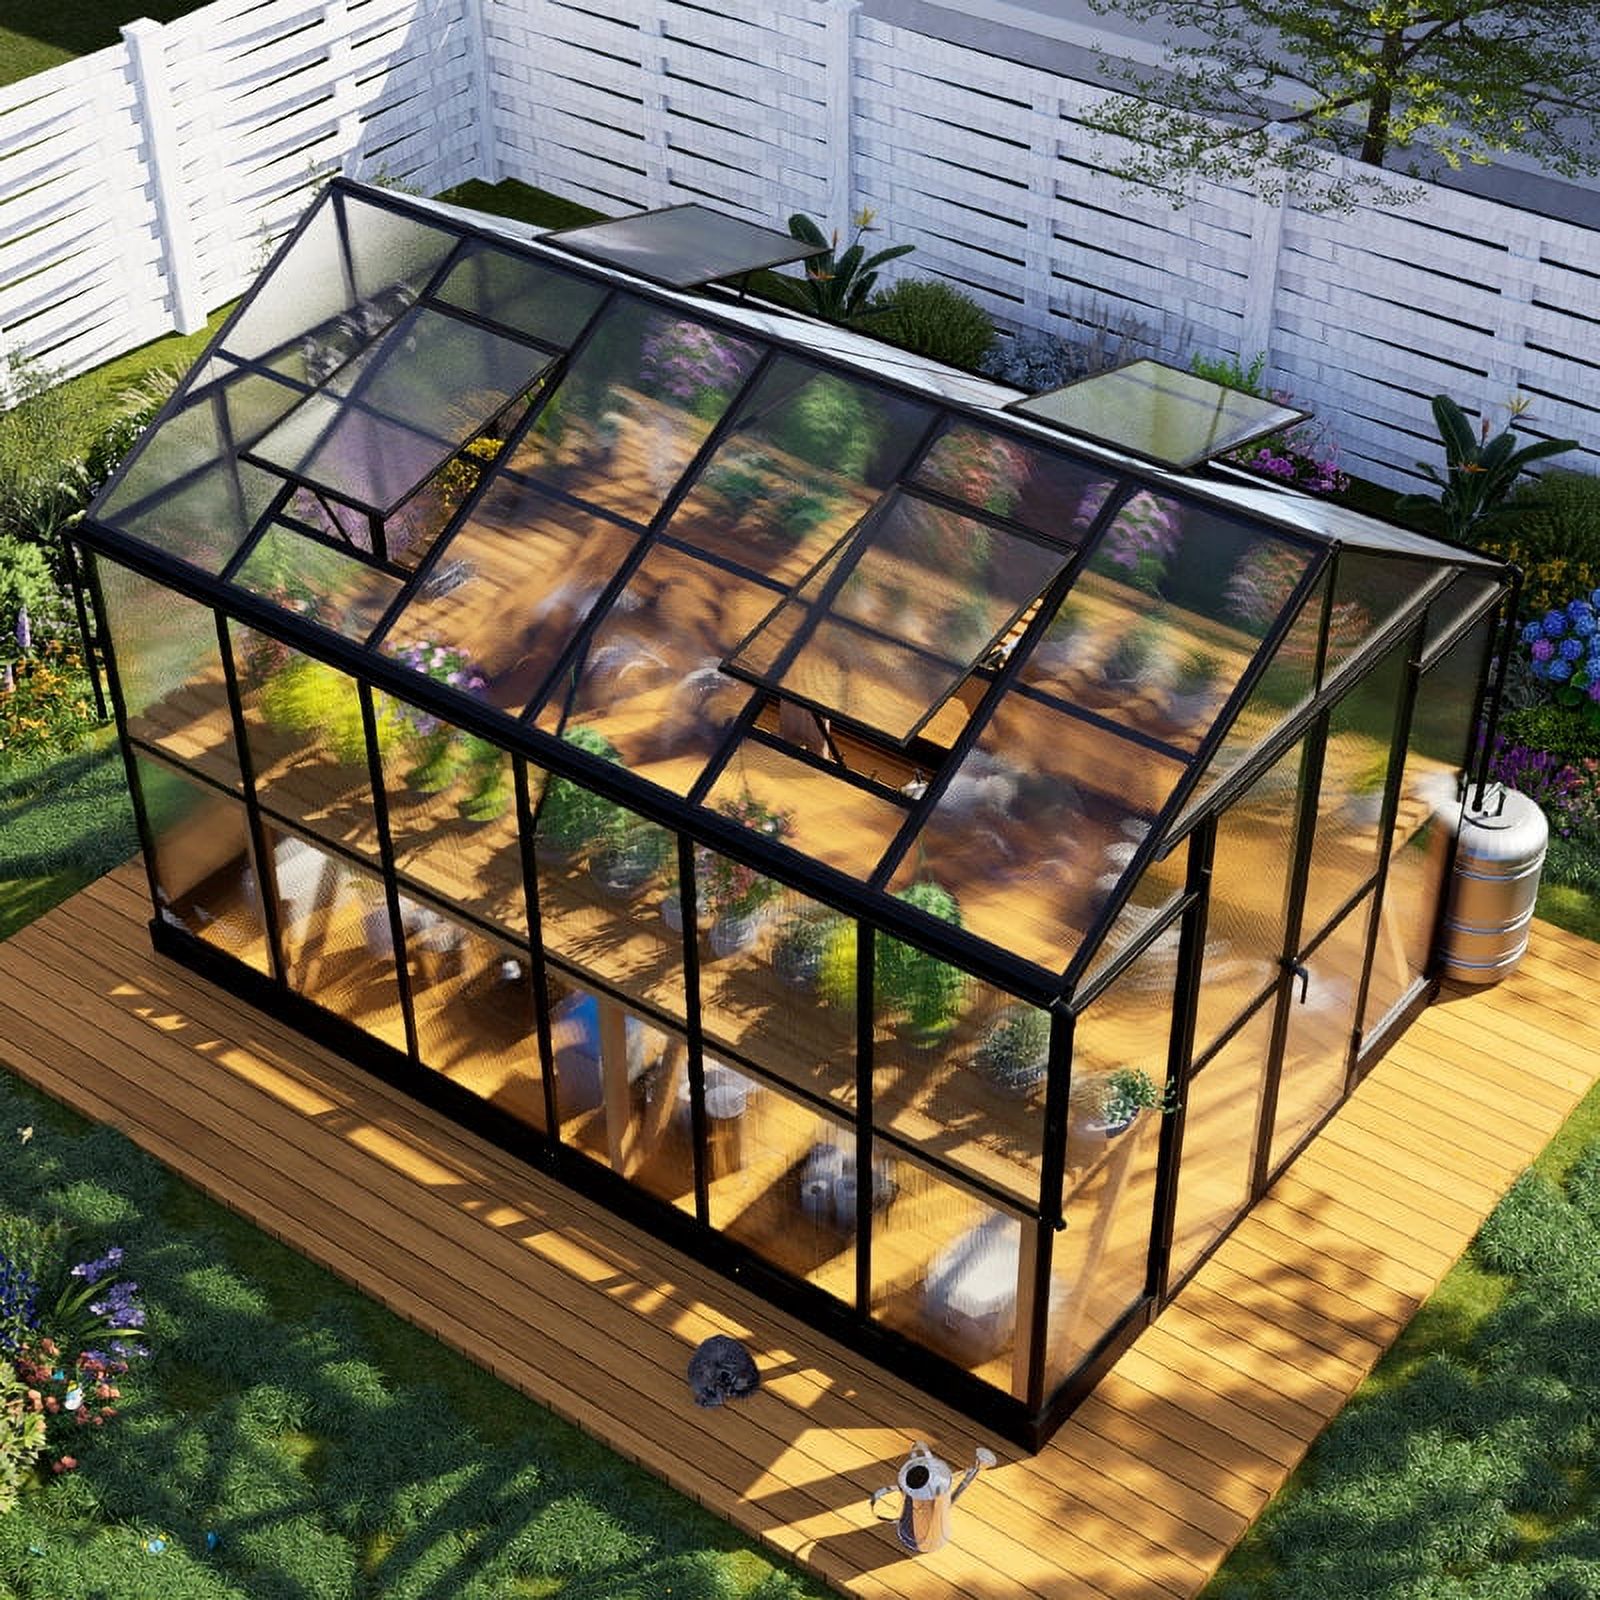 AMERLIFE 8x12x7.5 ft Polycarbonate Frame  Greenhouse Double Swing Doors 4 Vents 5.2FT Added Wall Height, Black - image 2 of 7